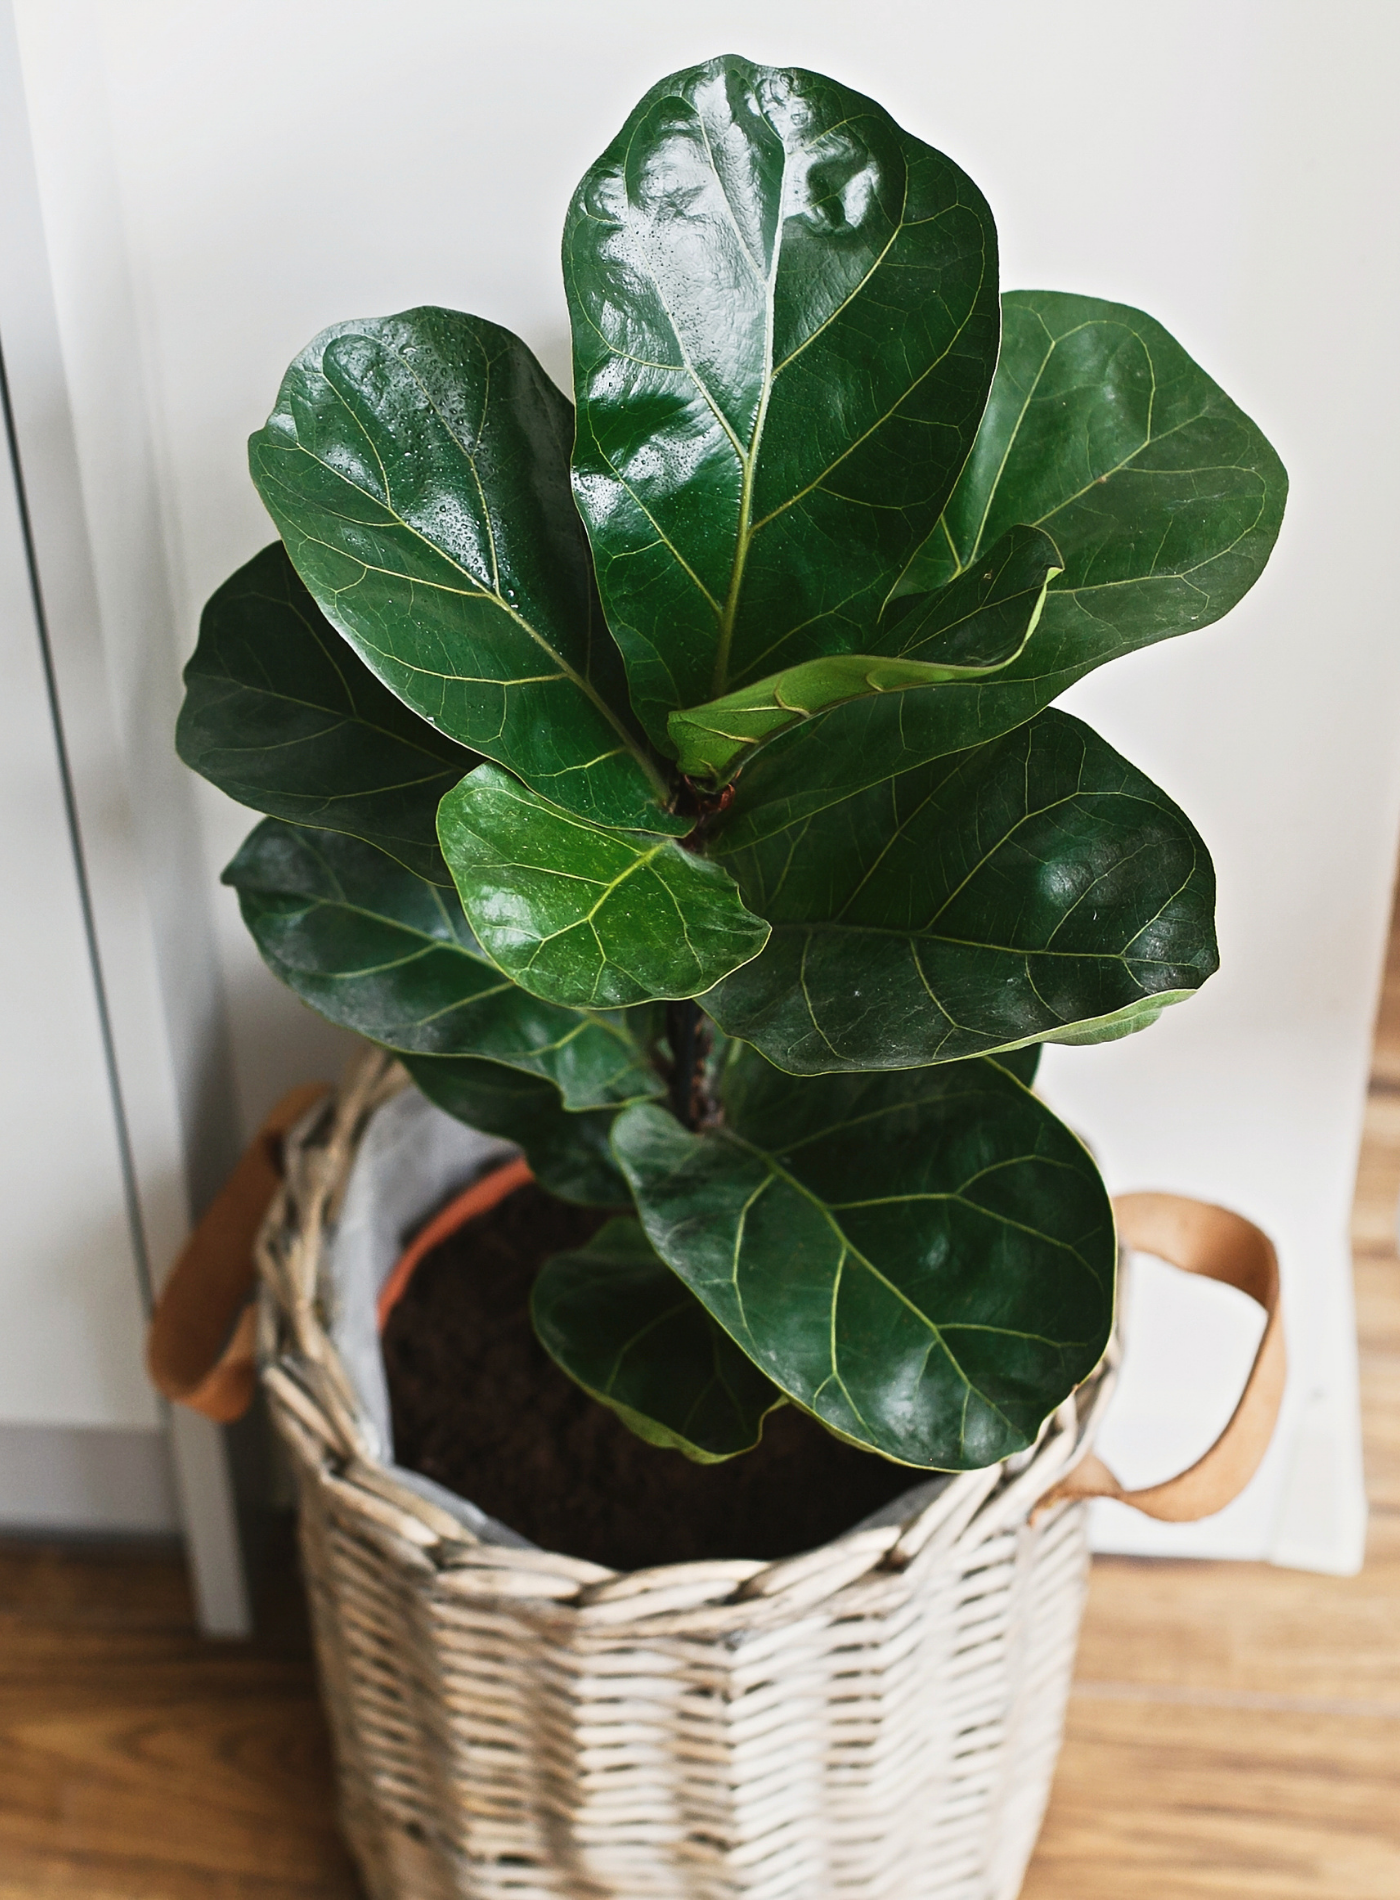 Favorite Online Resources For Houseplants